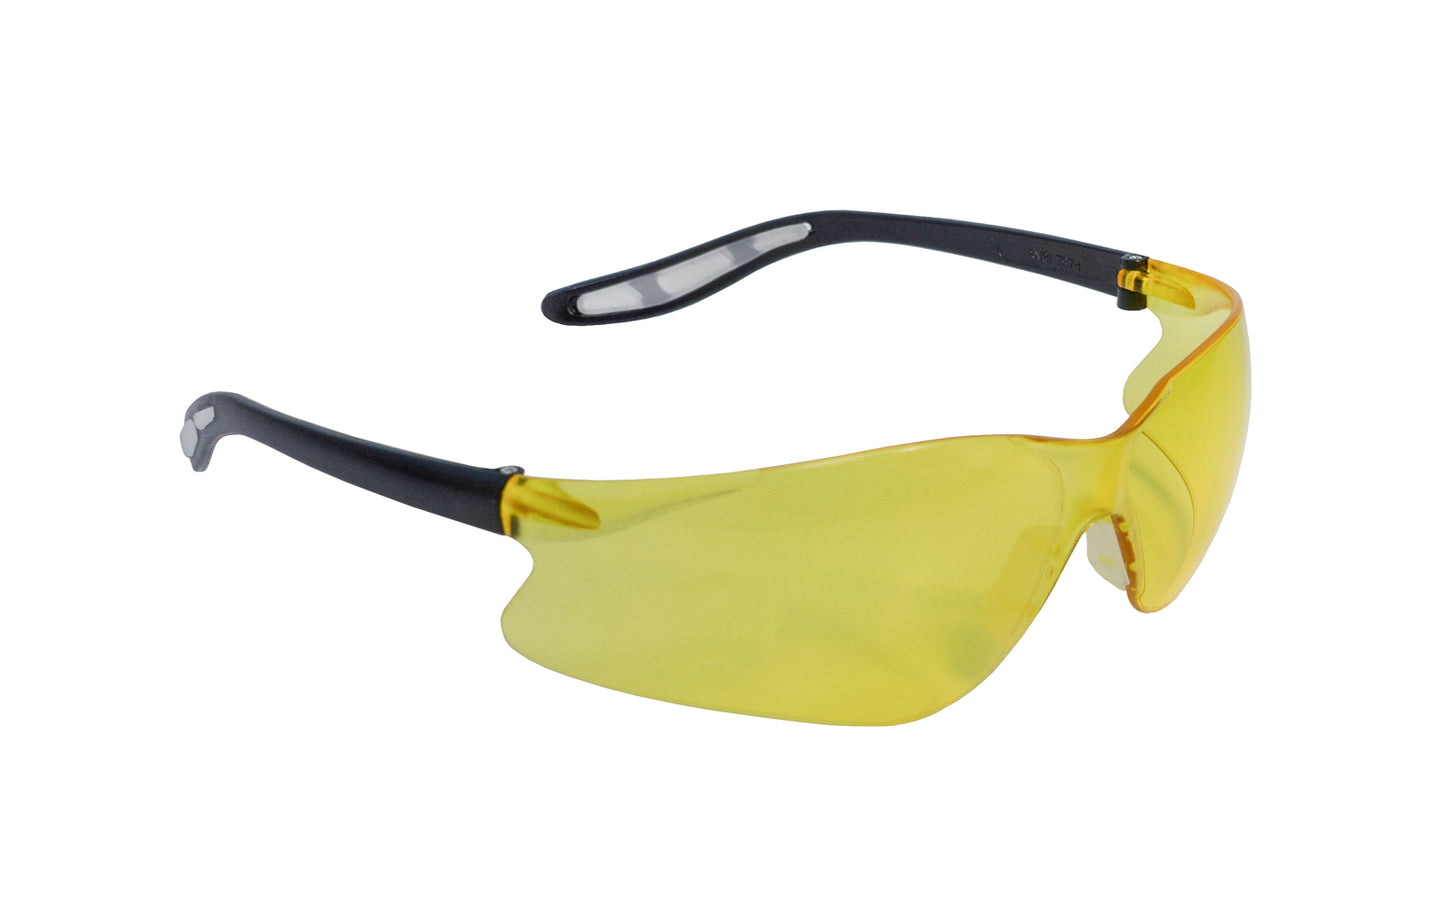 Fastcap Safety Glasses have high contrast amber lenses & great for the shop. Anti-fog & anti-static lenses. FastCap "CatEyes" amber lenses. ANSI rated Z87.1. No magnification. UV Protection - UVB 95% UVA 60%. ANSI / OSHA approved. Shatterproof & scratch resistant. 663807800886. Model SG-AF-A510. Yellow lenses